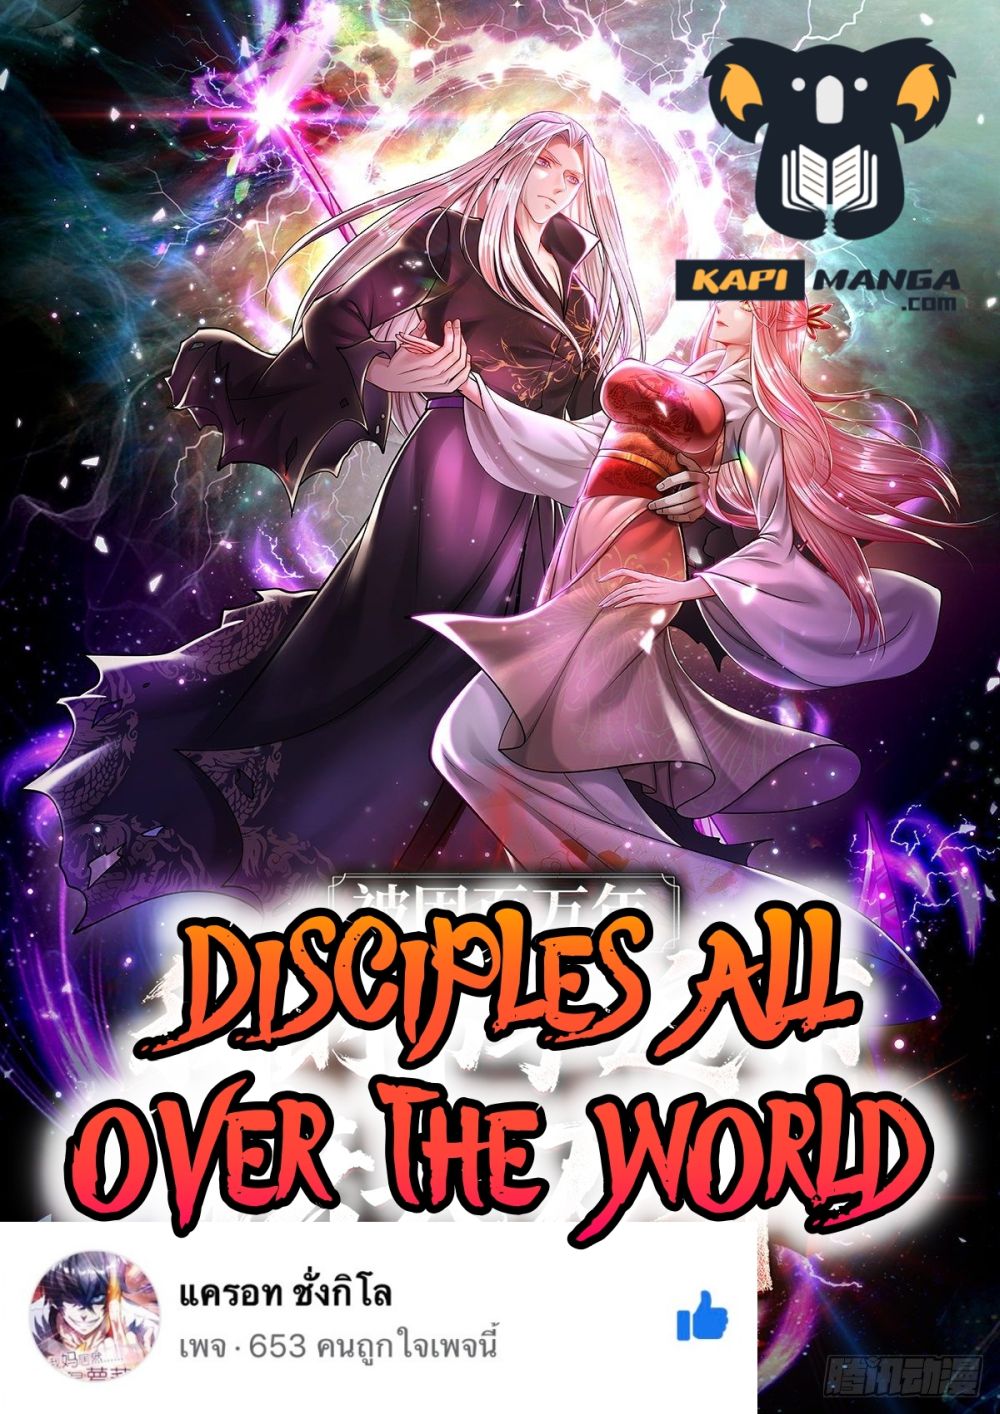 Disciples All Over the World à¸à¸­à¸à¸à¸µà¹ 57 (1)